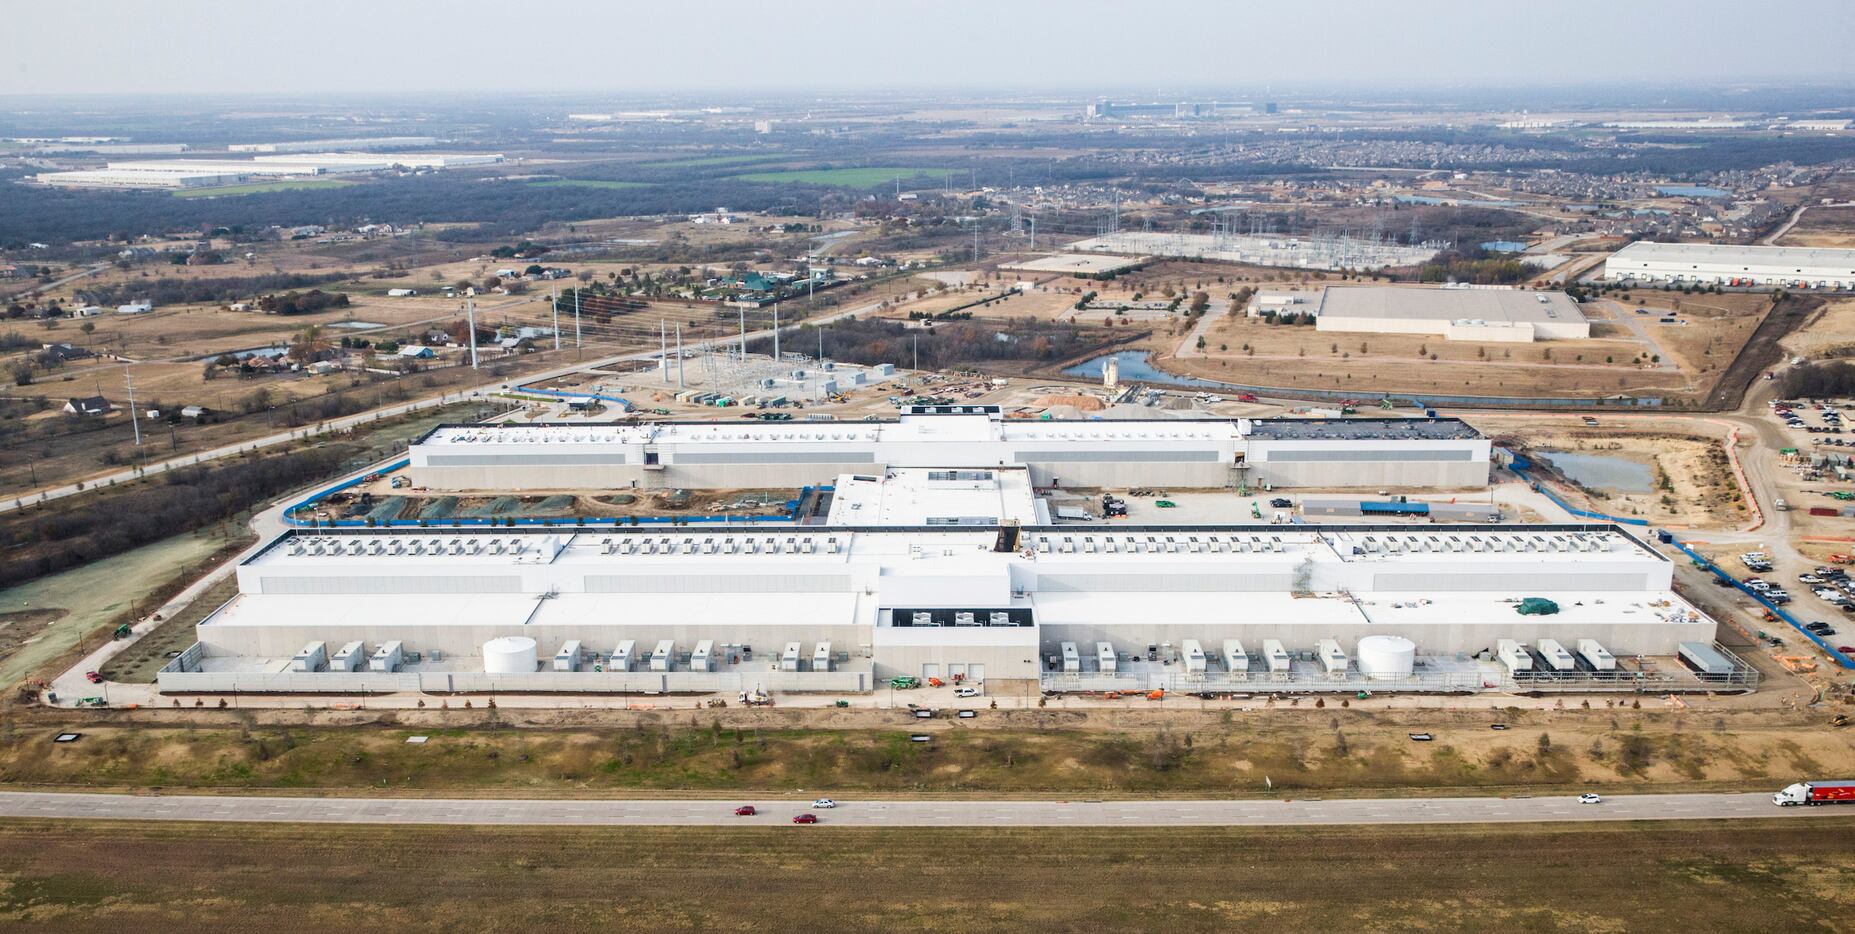 Aerial view of the new Facebook Data Center, which is part of the Alliance Texas development.